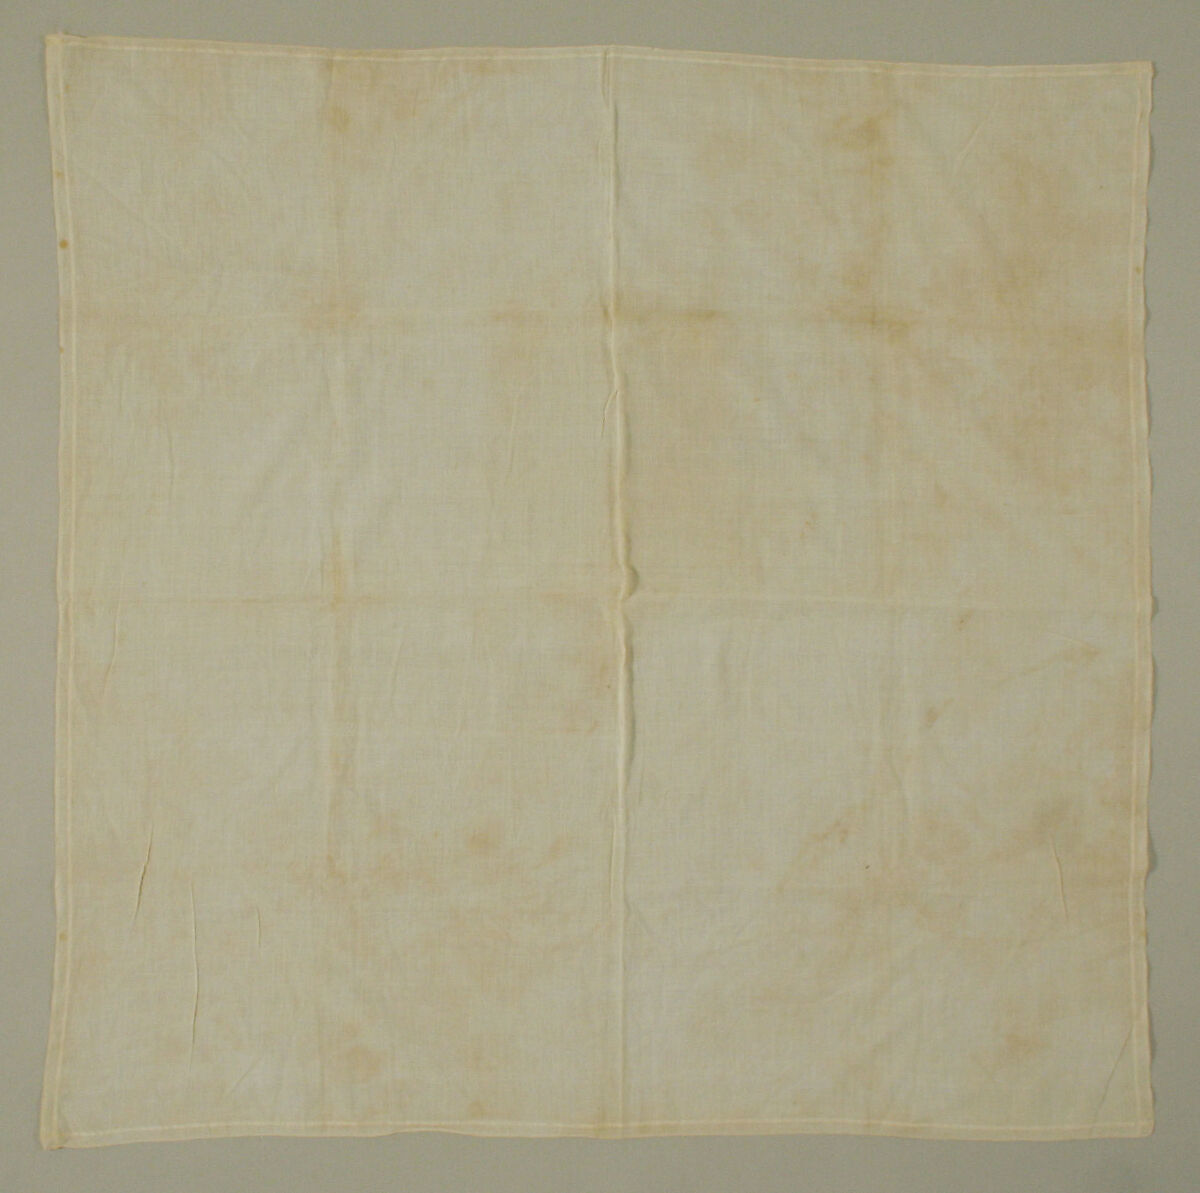 Fichu, cotton, probably American 